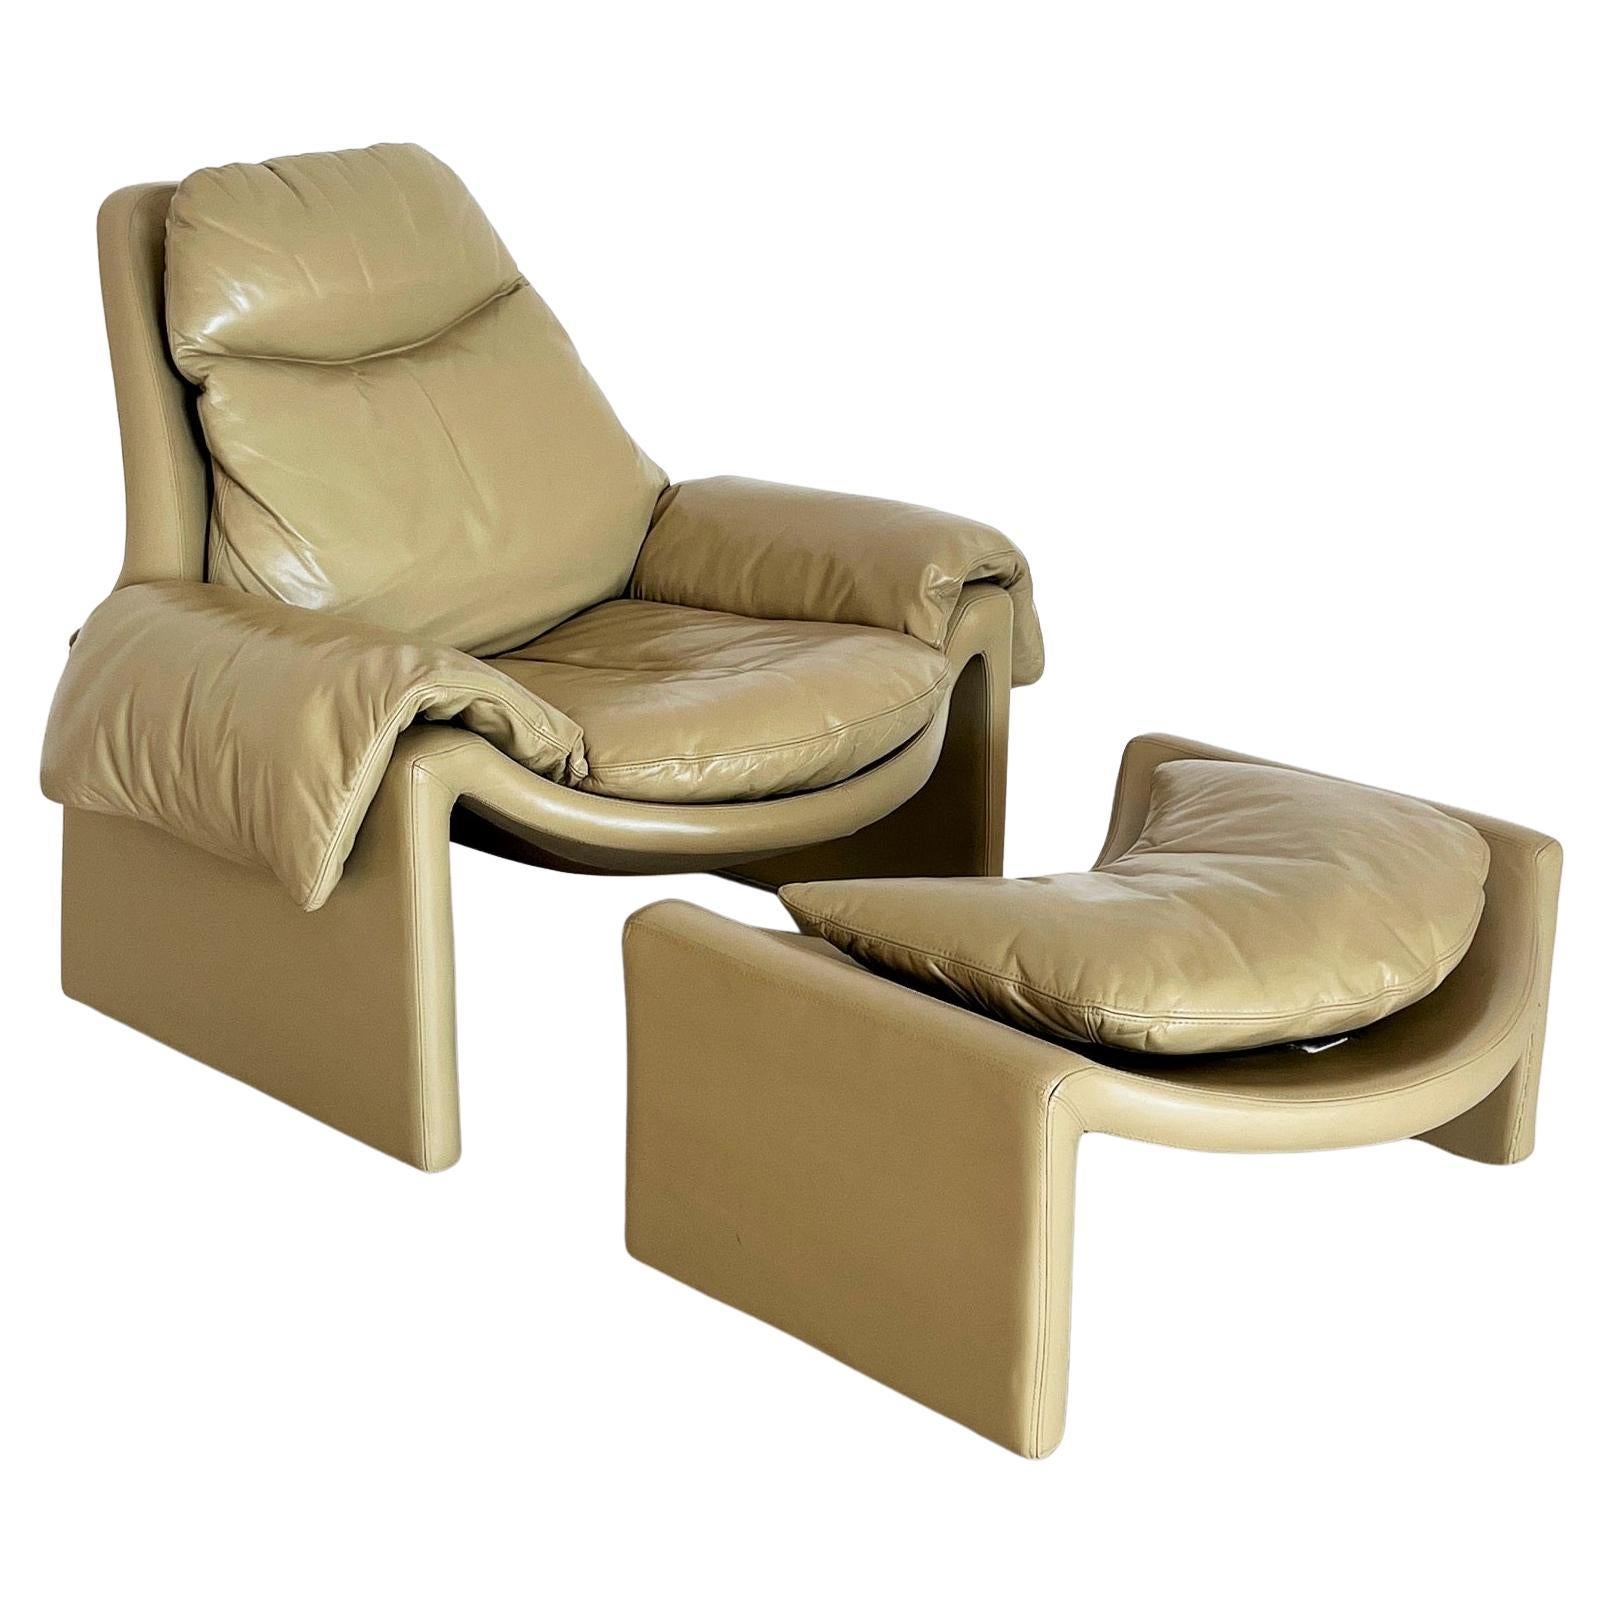 Vittorio Introini P60 Set of Lounge Chair with Ottoman for Saporiti, 1960s For Sale